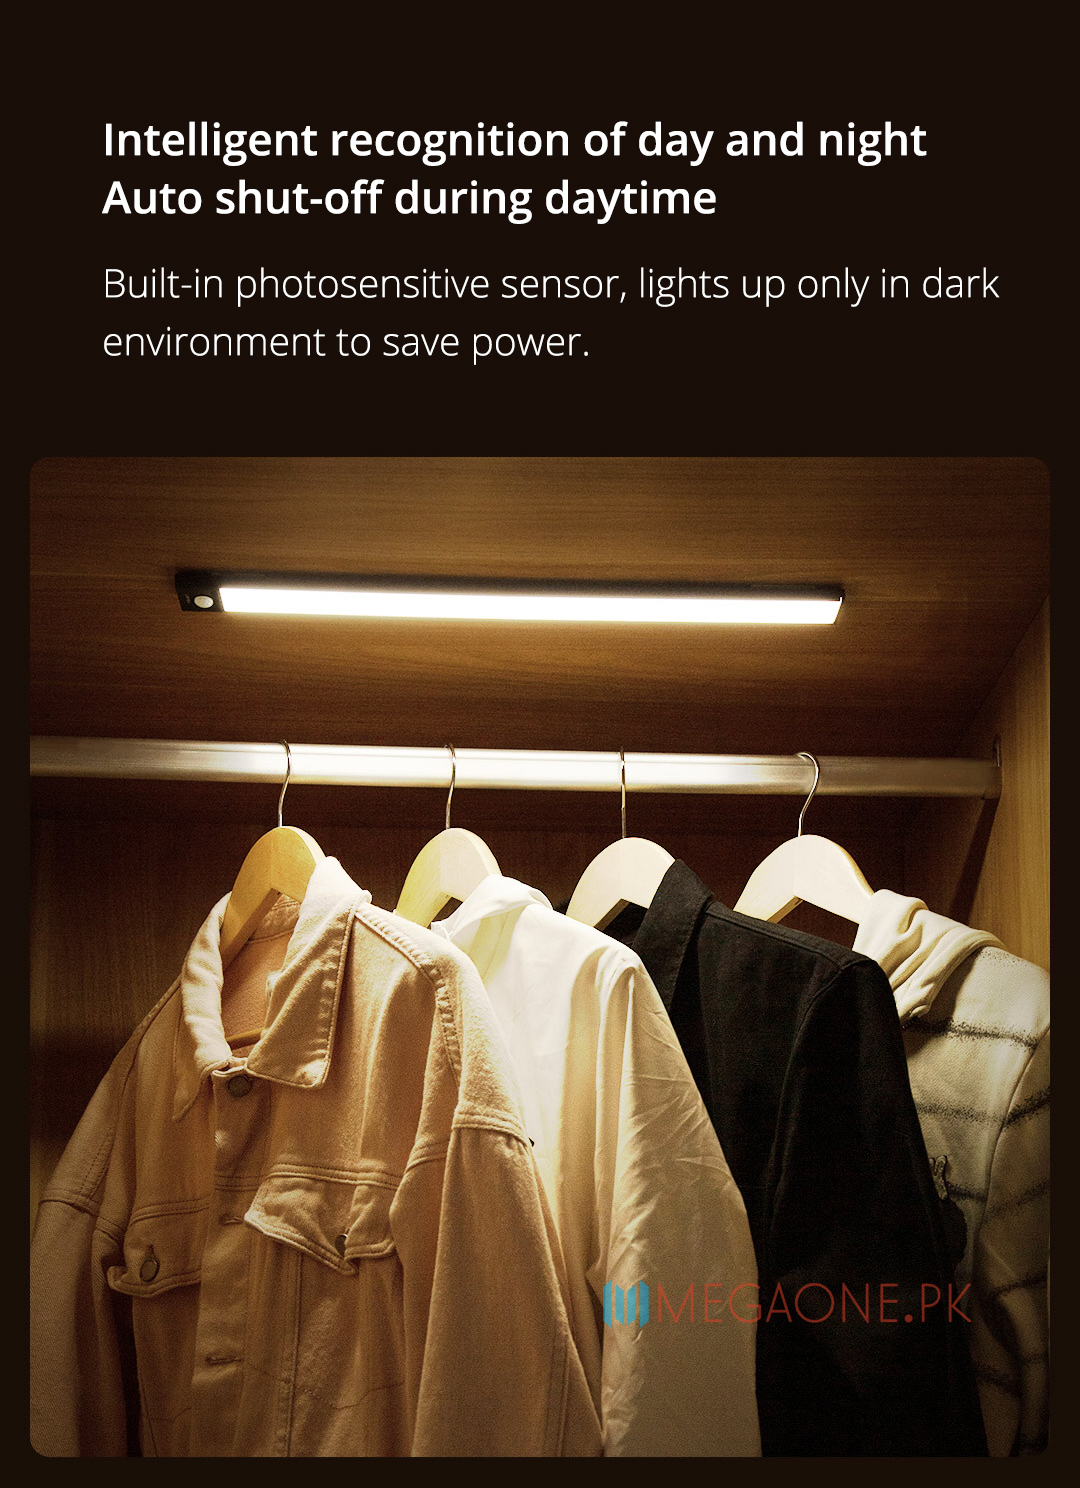 Built-in photosensitive sensor, lights up only in dark environment, save power, don't bother.